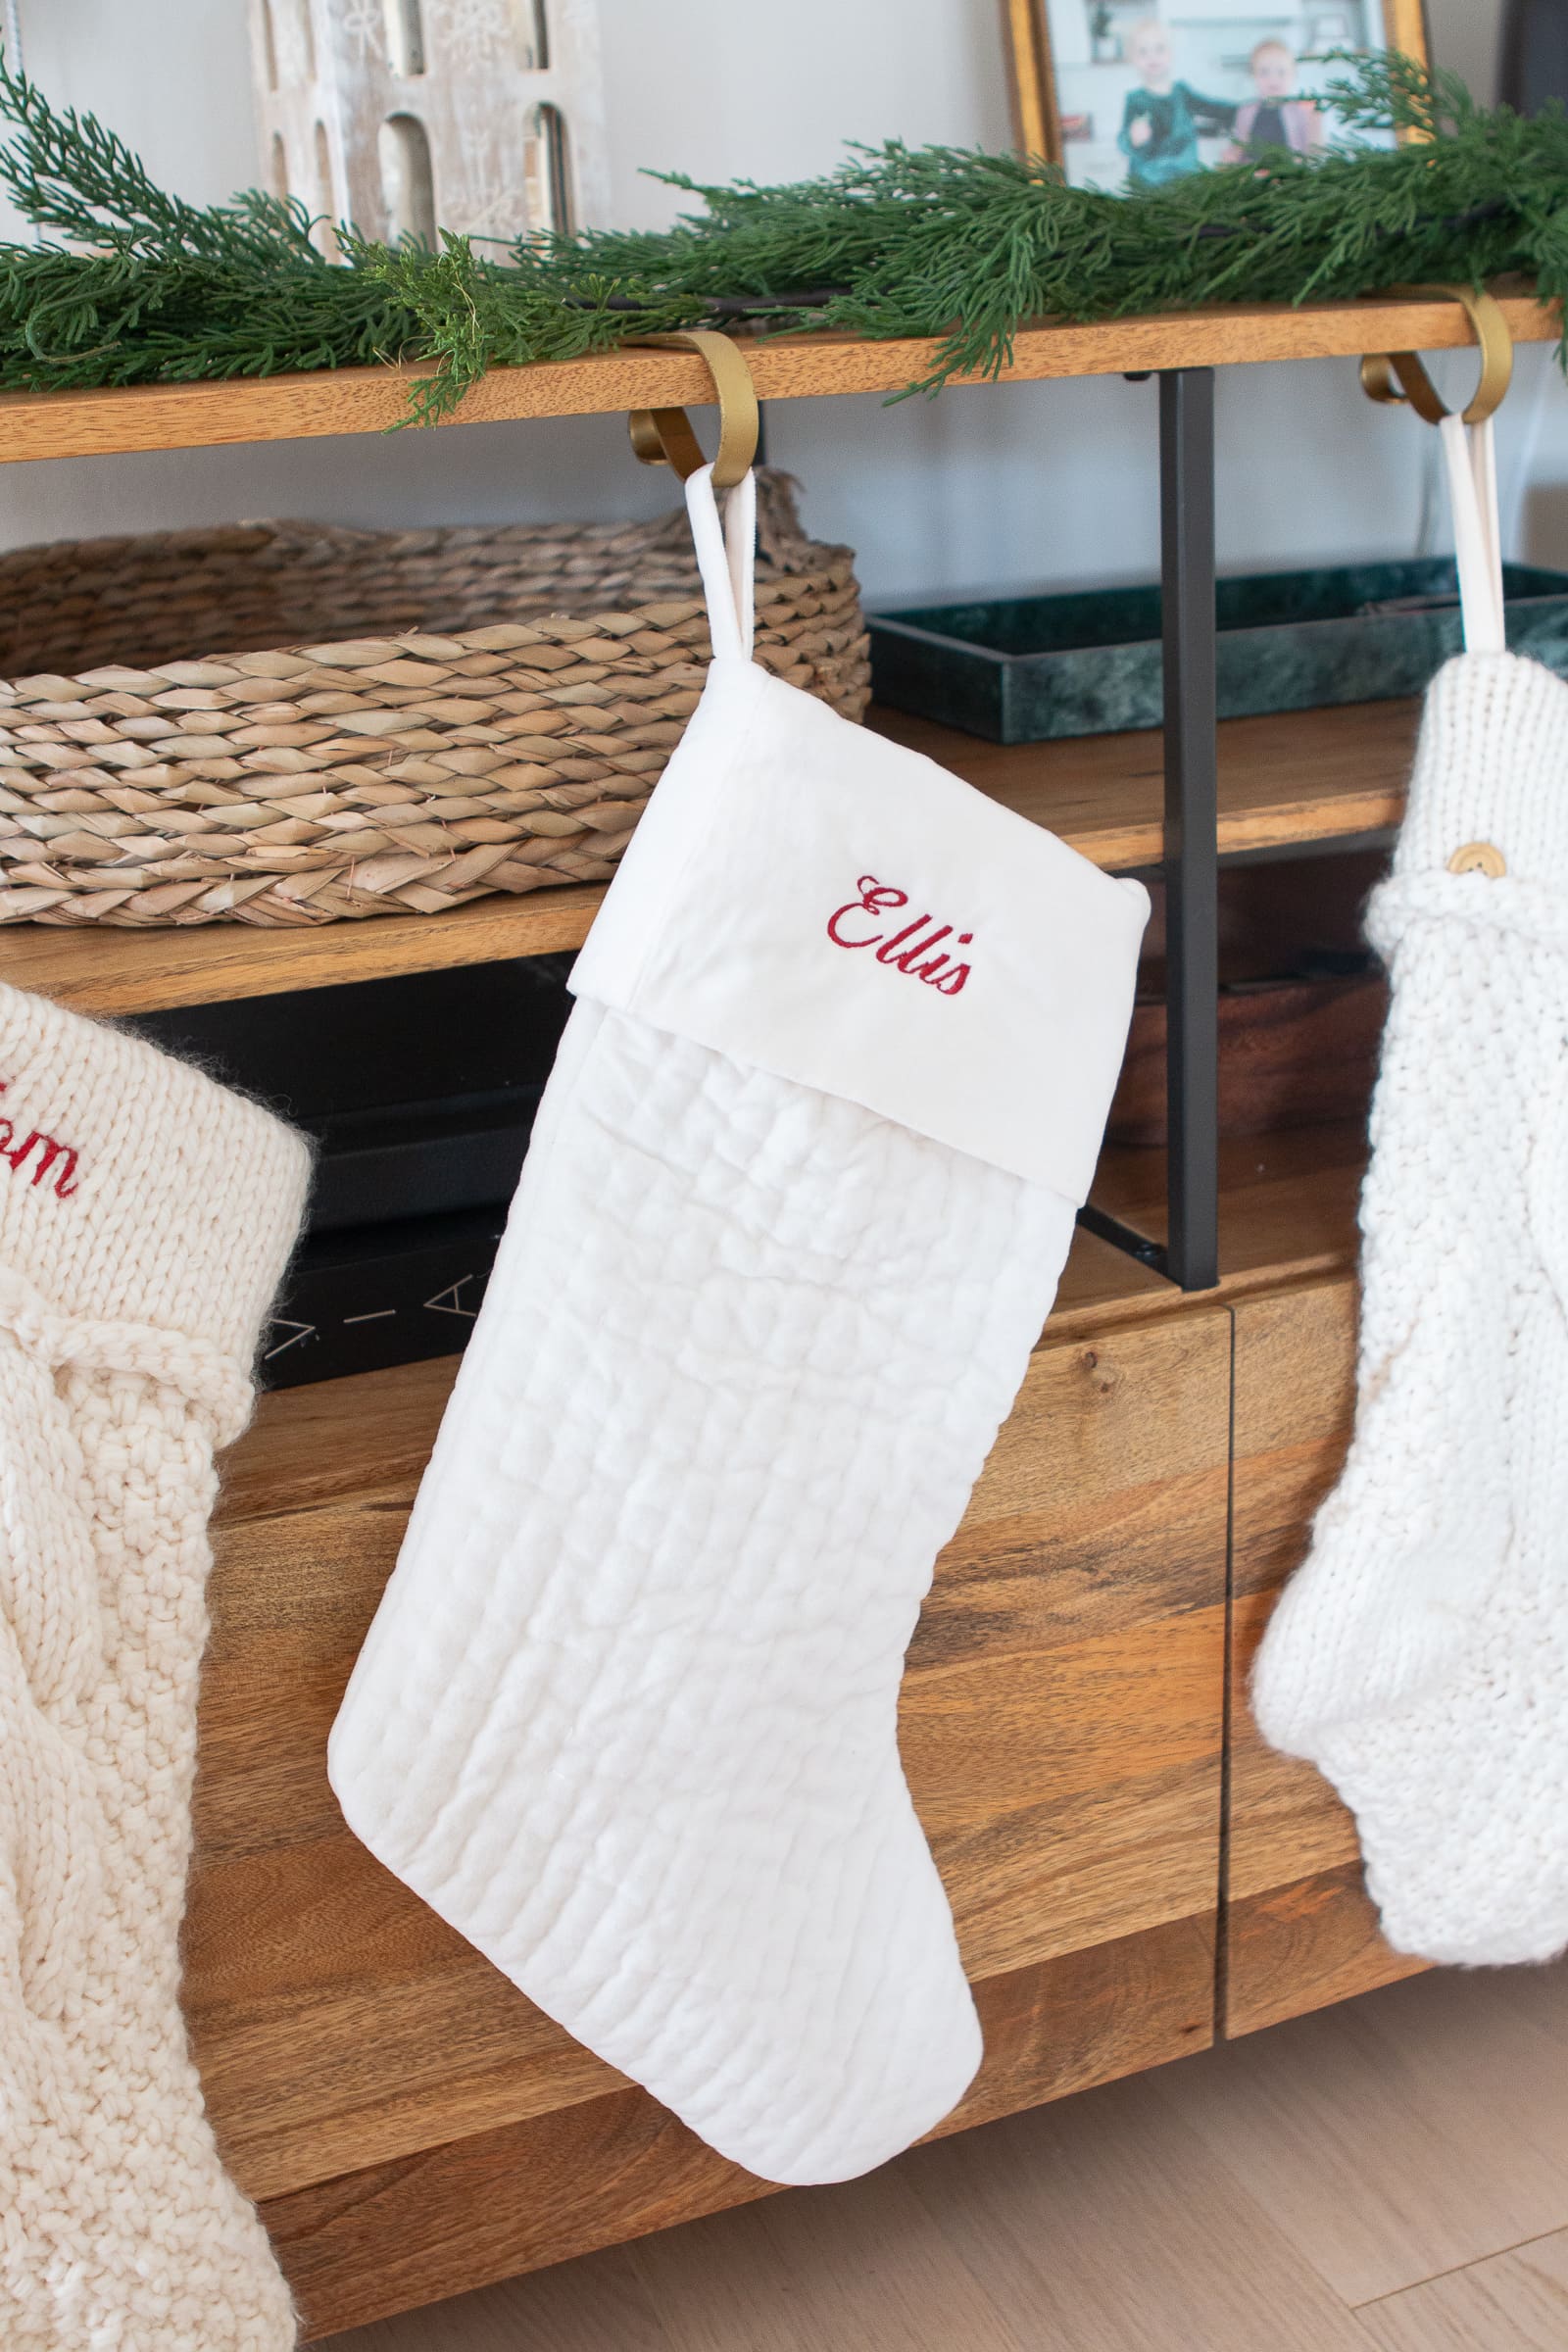 Adding stockings to our front entryway